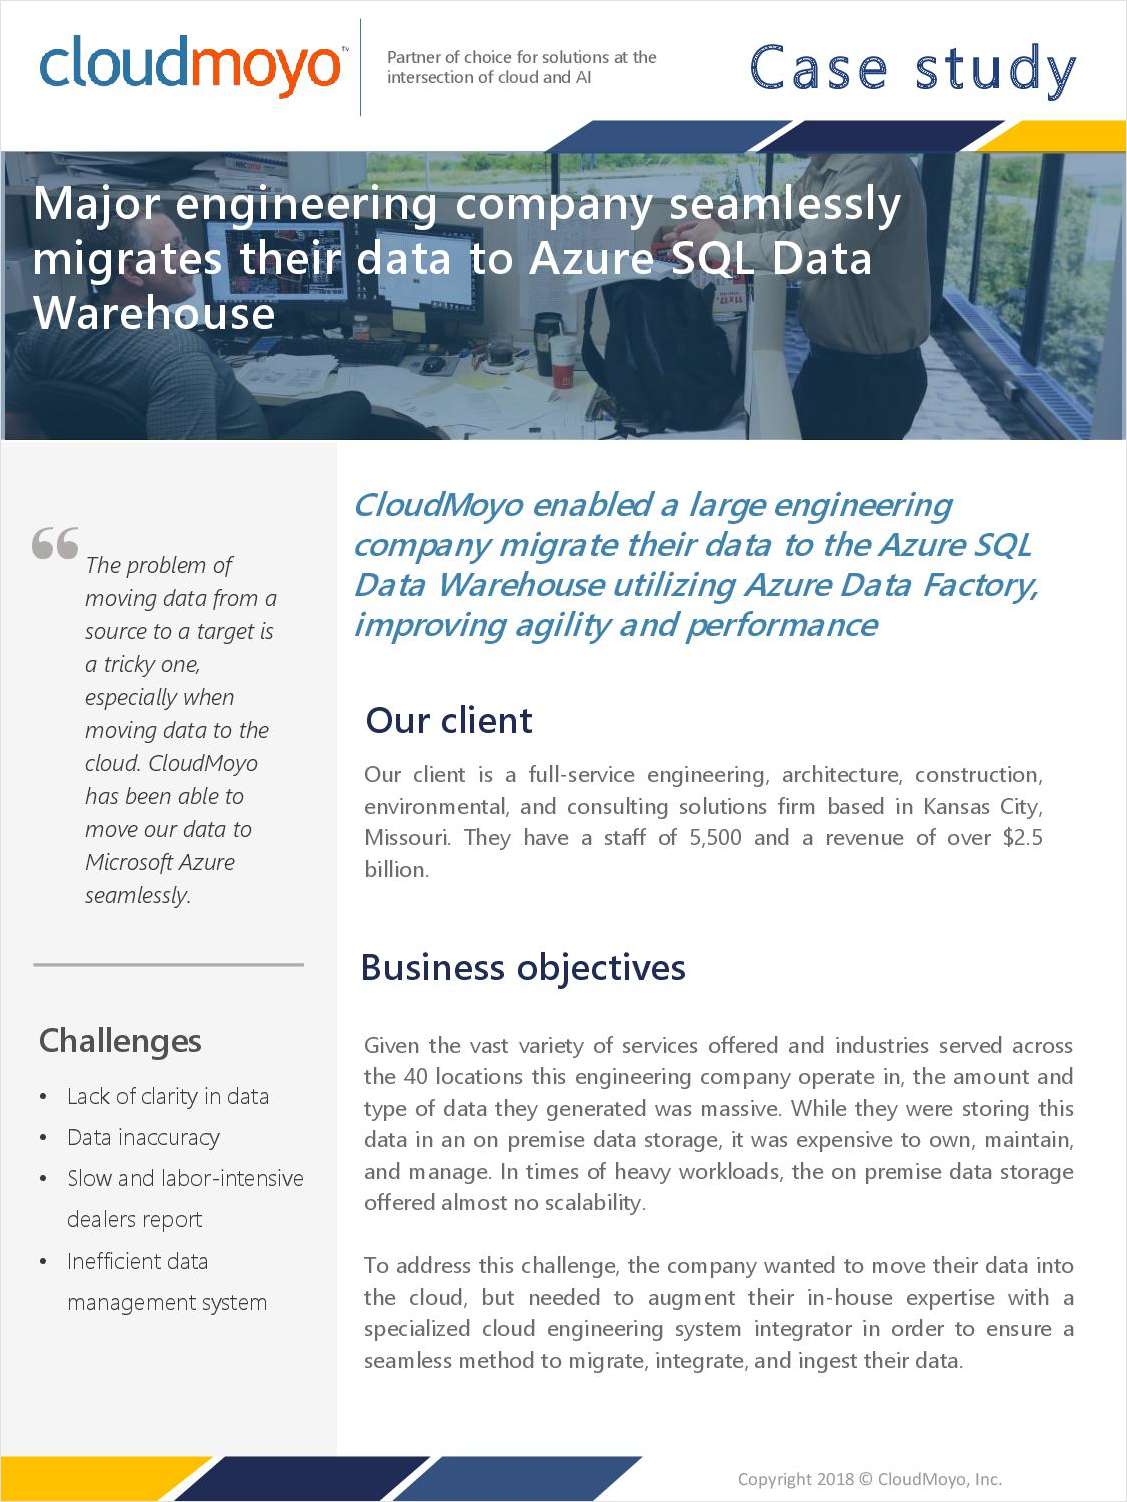 Major Engineering Company Seamlessly Migrates Their Data to Azure SQL Data Warehouse